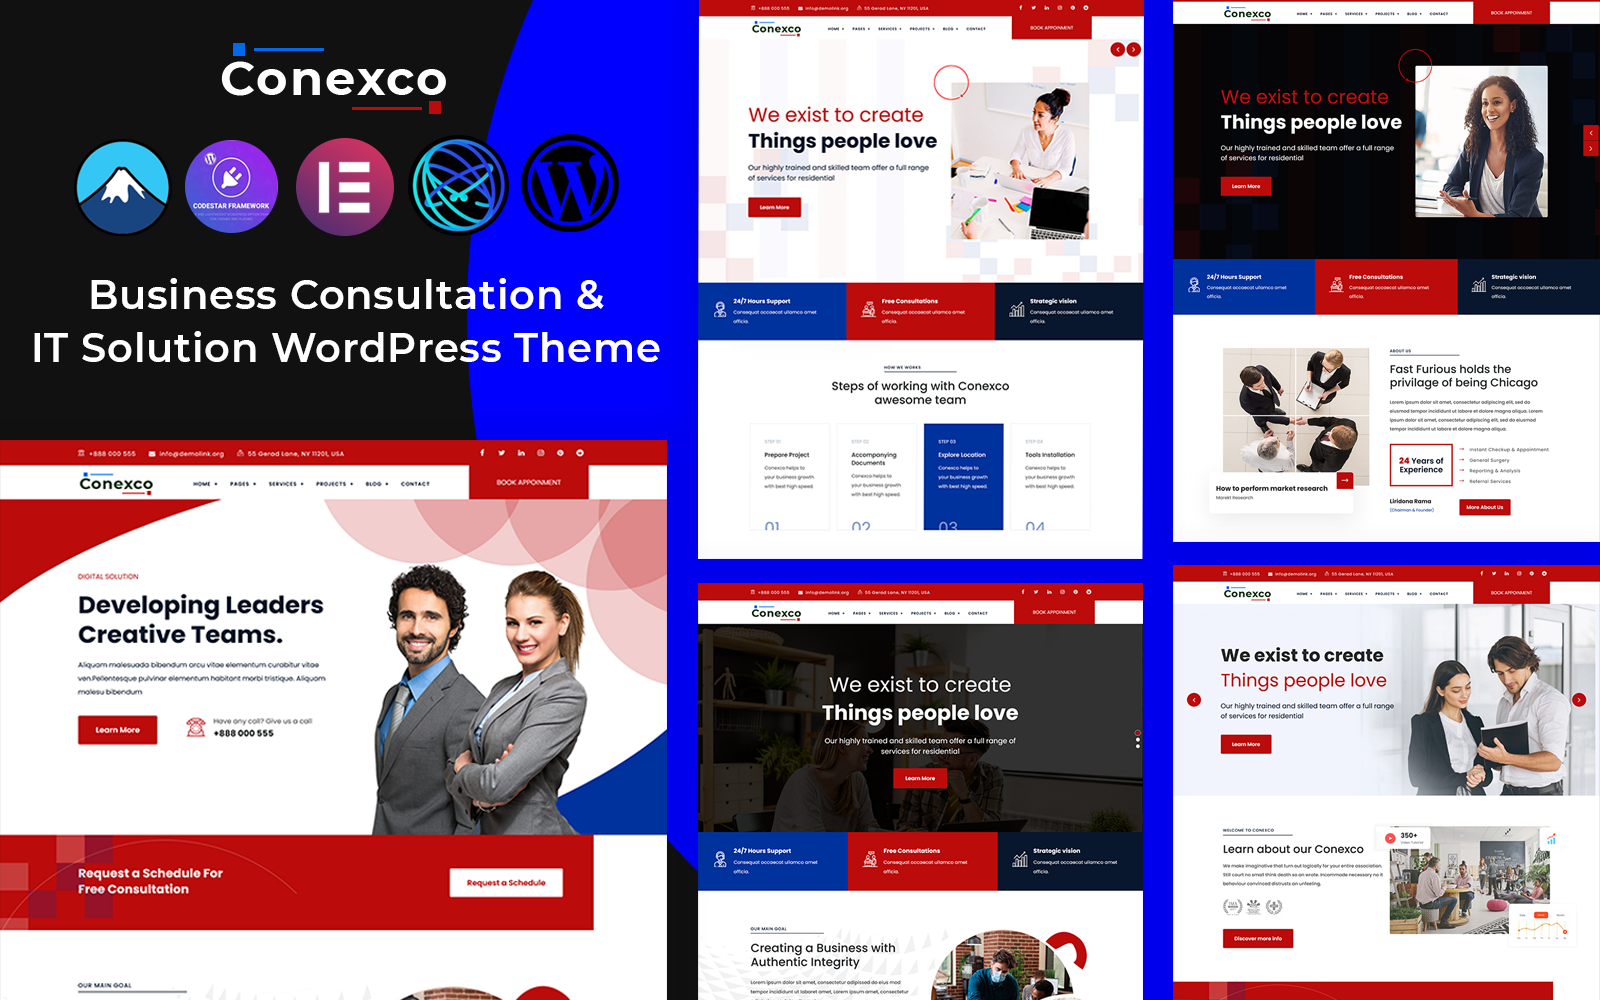 Conexco - Business Consultation and IT WordPress Theme